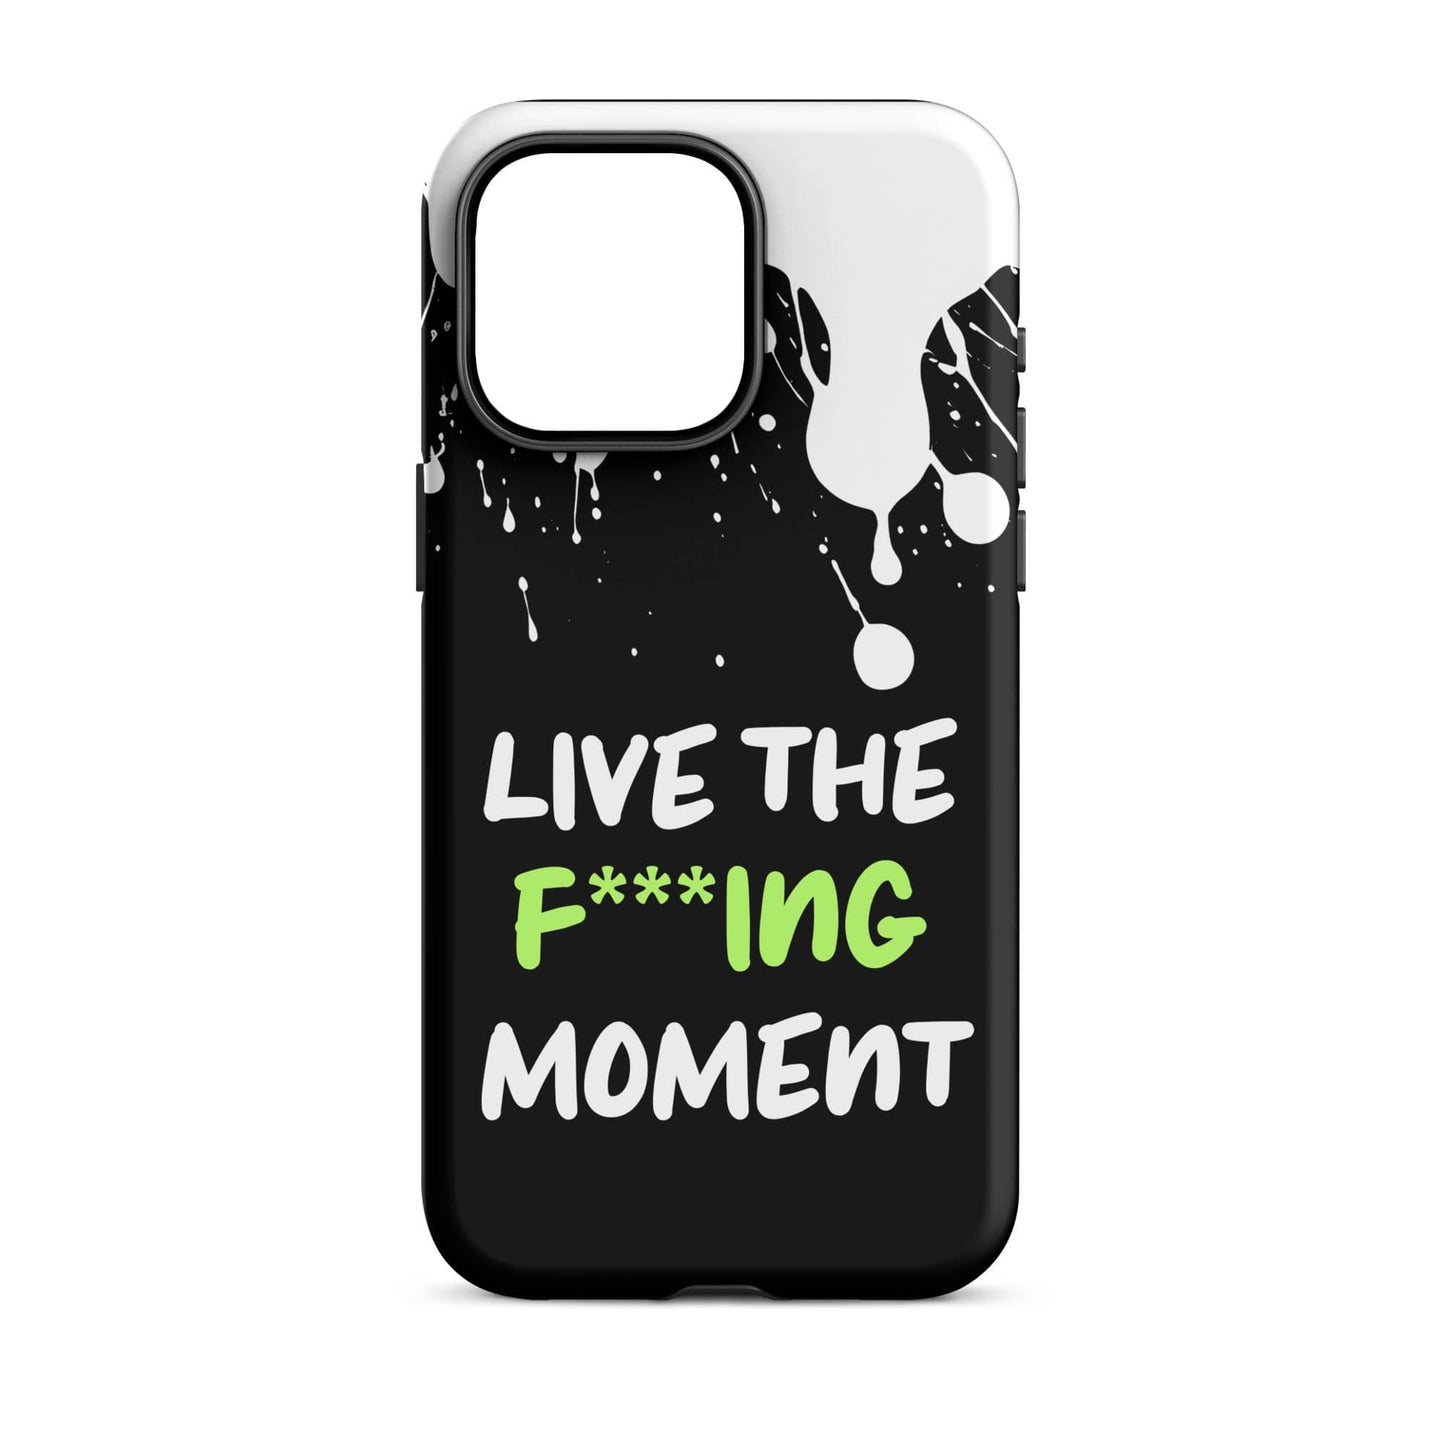 Live The F***ing Moment - (Black) Quoted iPhone Case